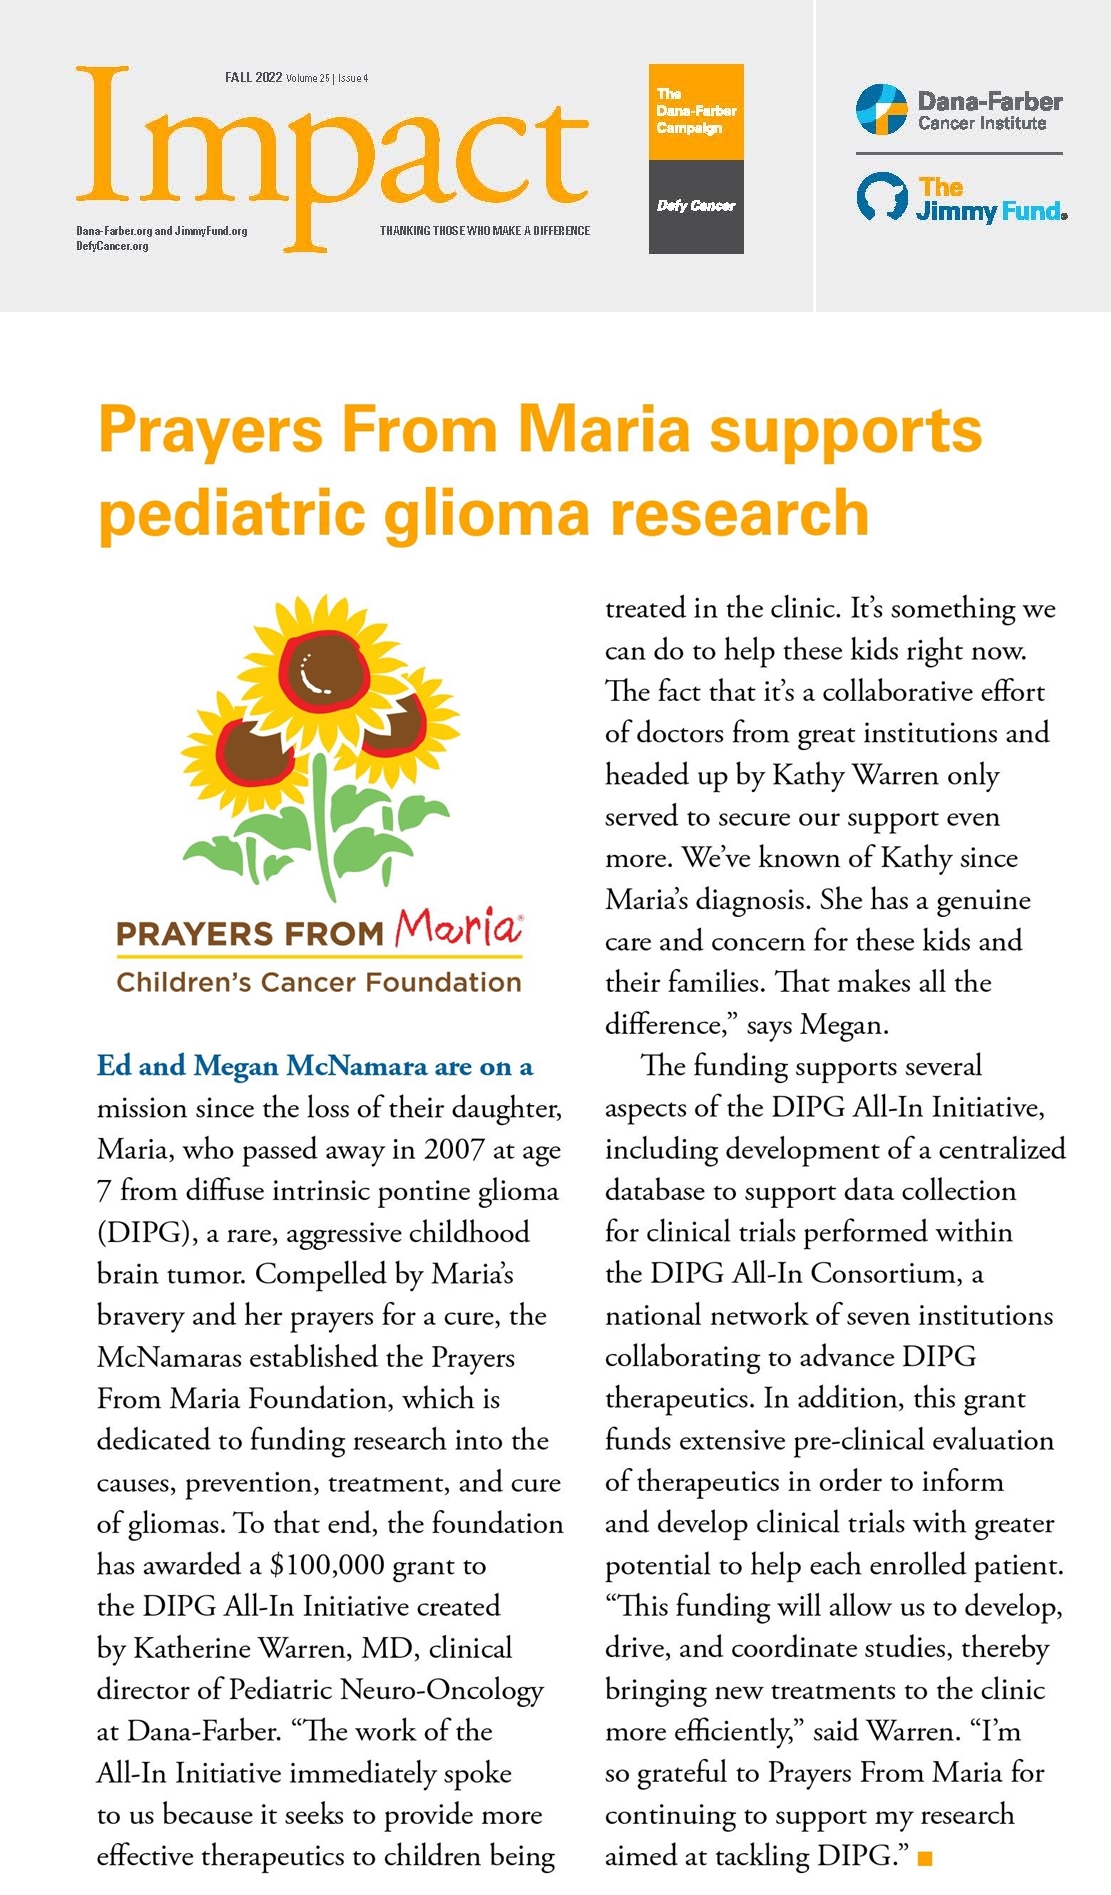 Prayers From Maria Impact article